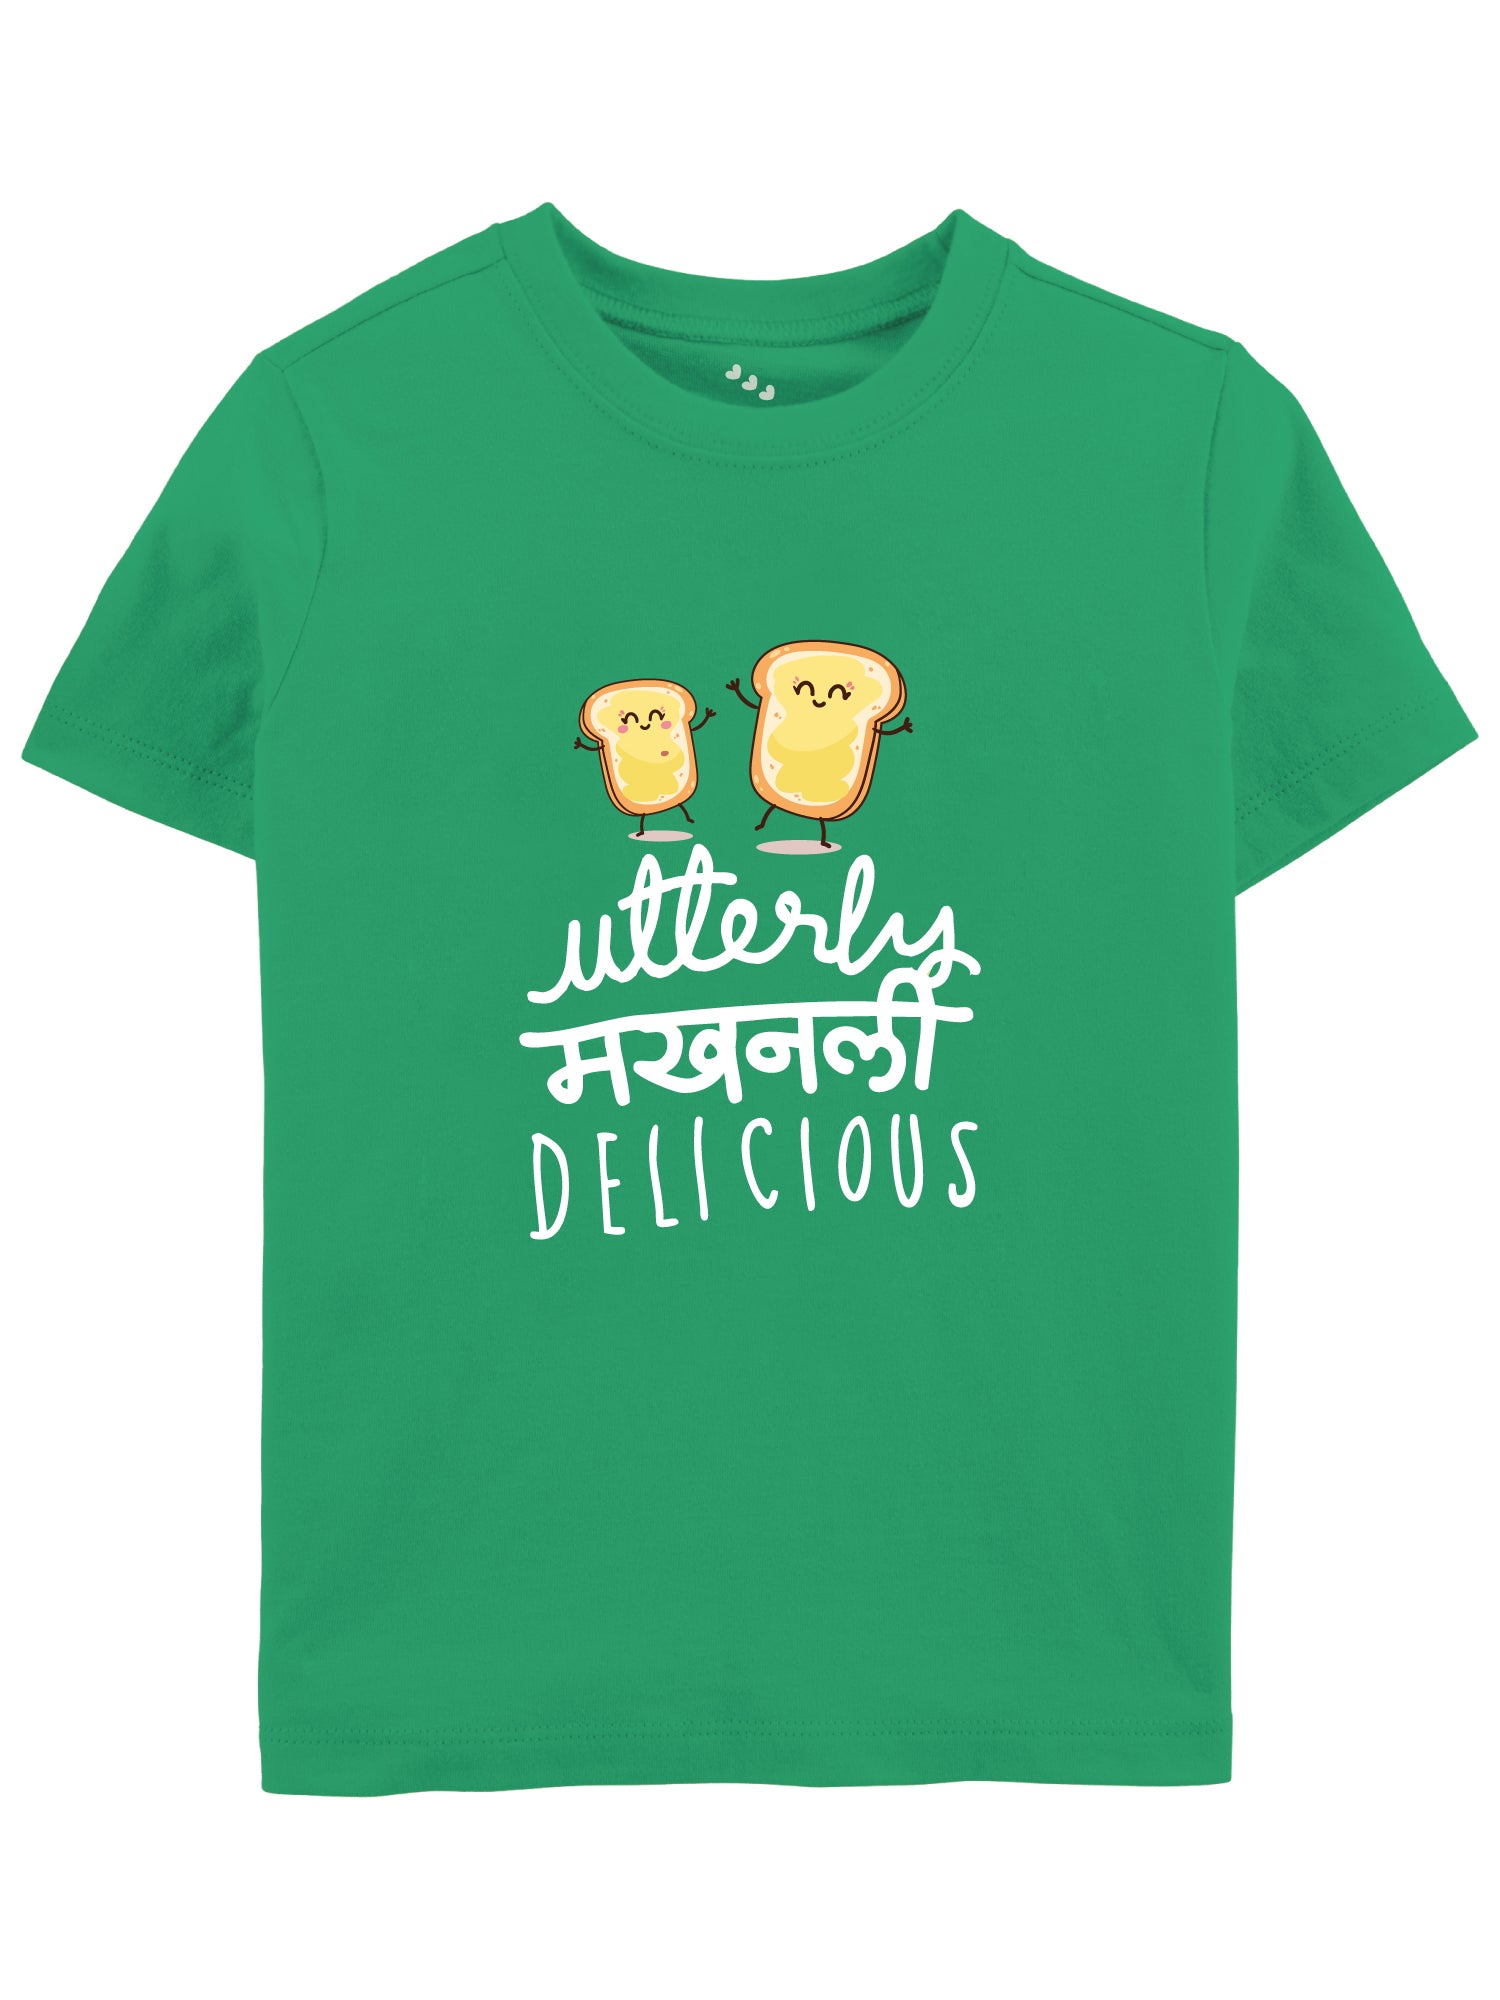 Utterly Makhanly Delicious - Tee